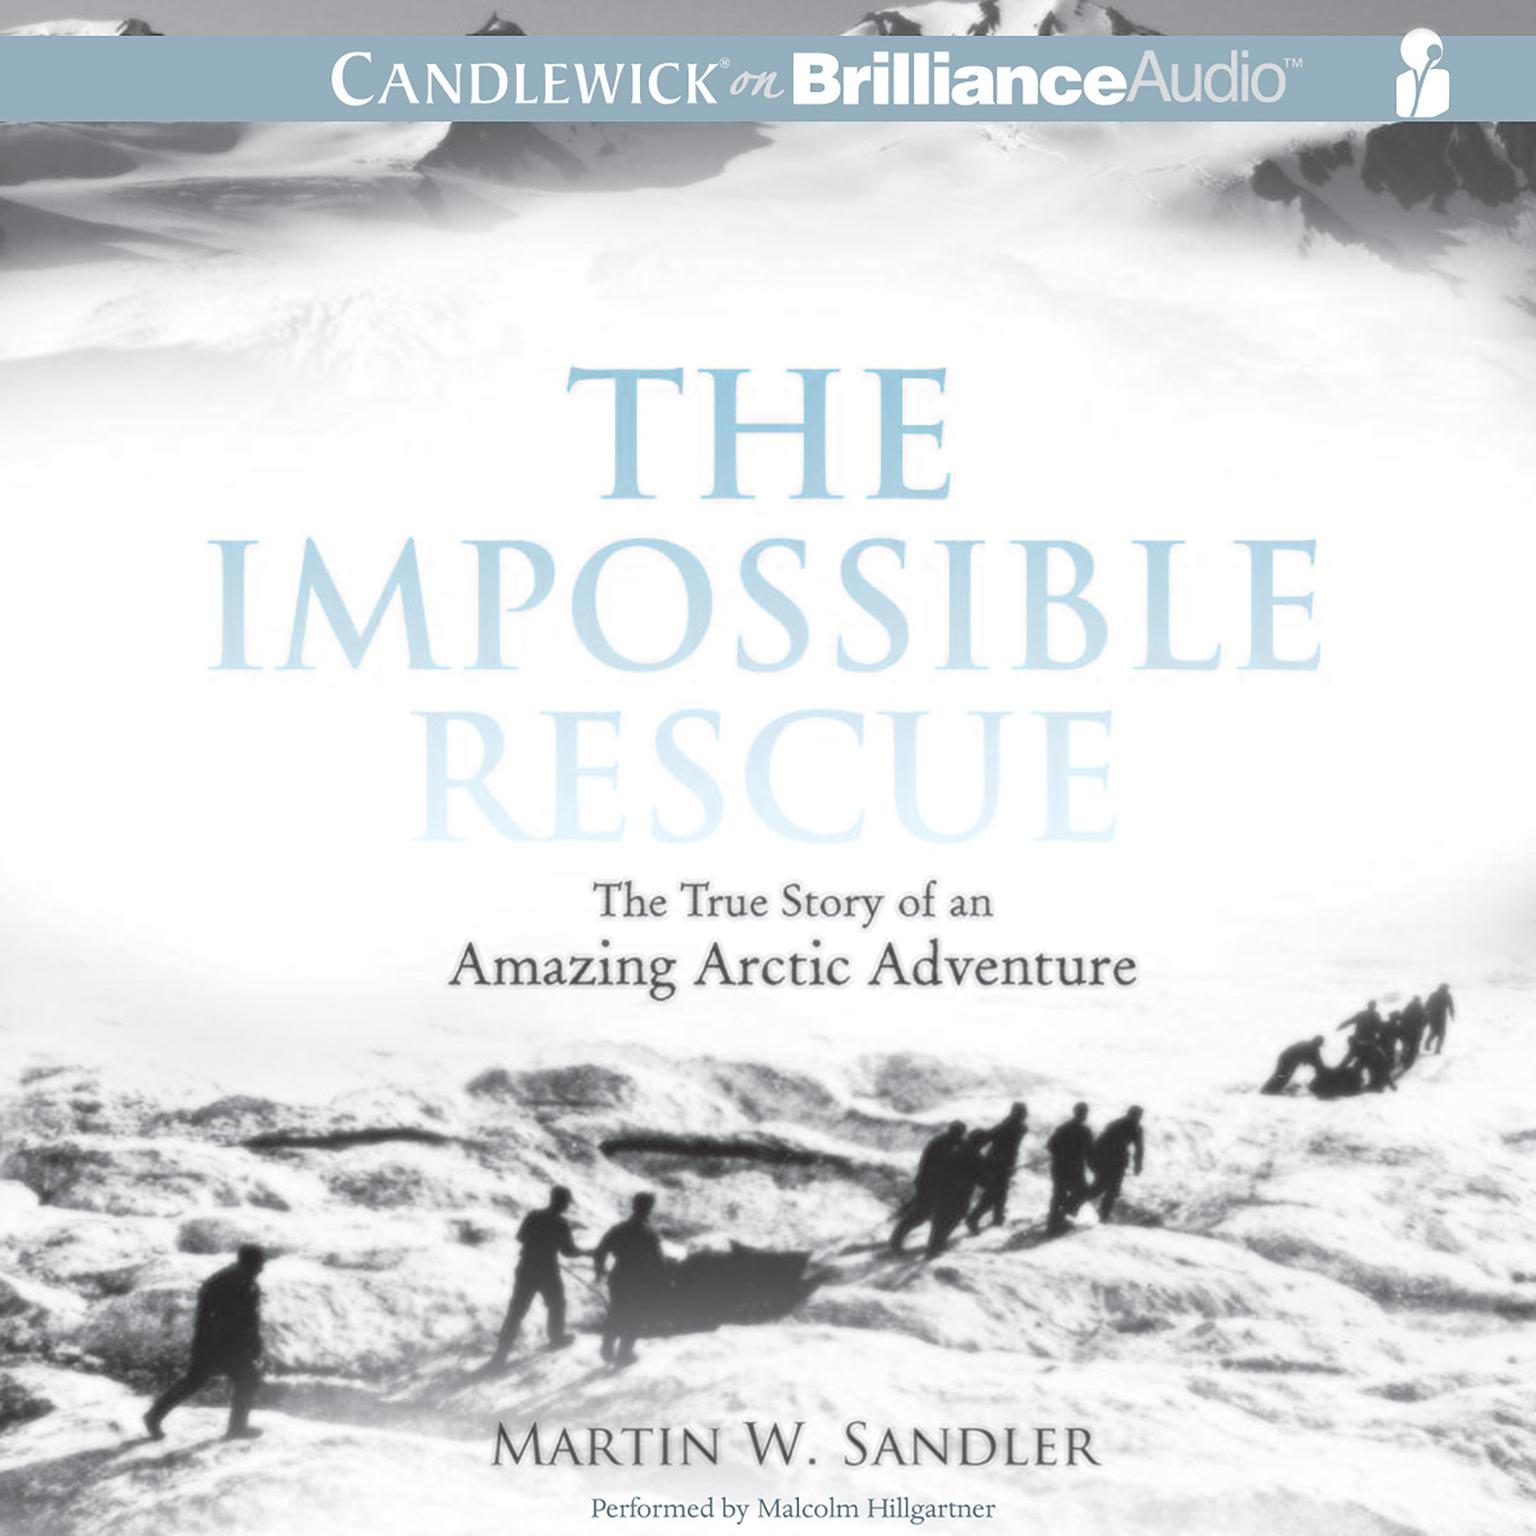 The Impossible Rescue: The True Story of an Amazing Arctic Adventure Audiobook, by Martin W. Sandler